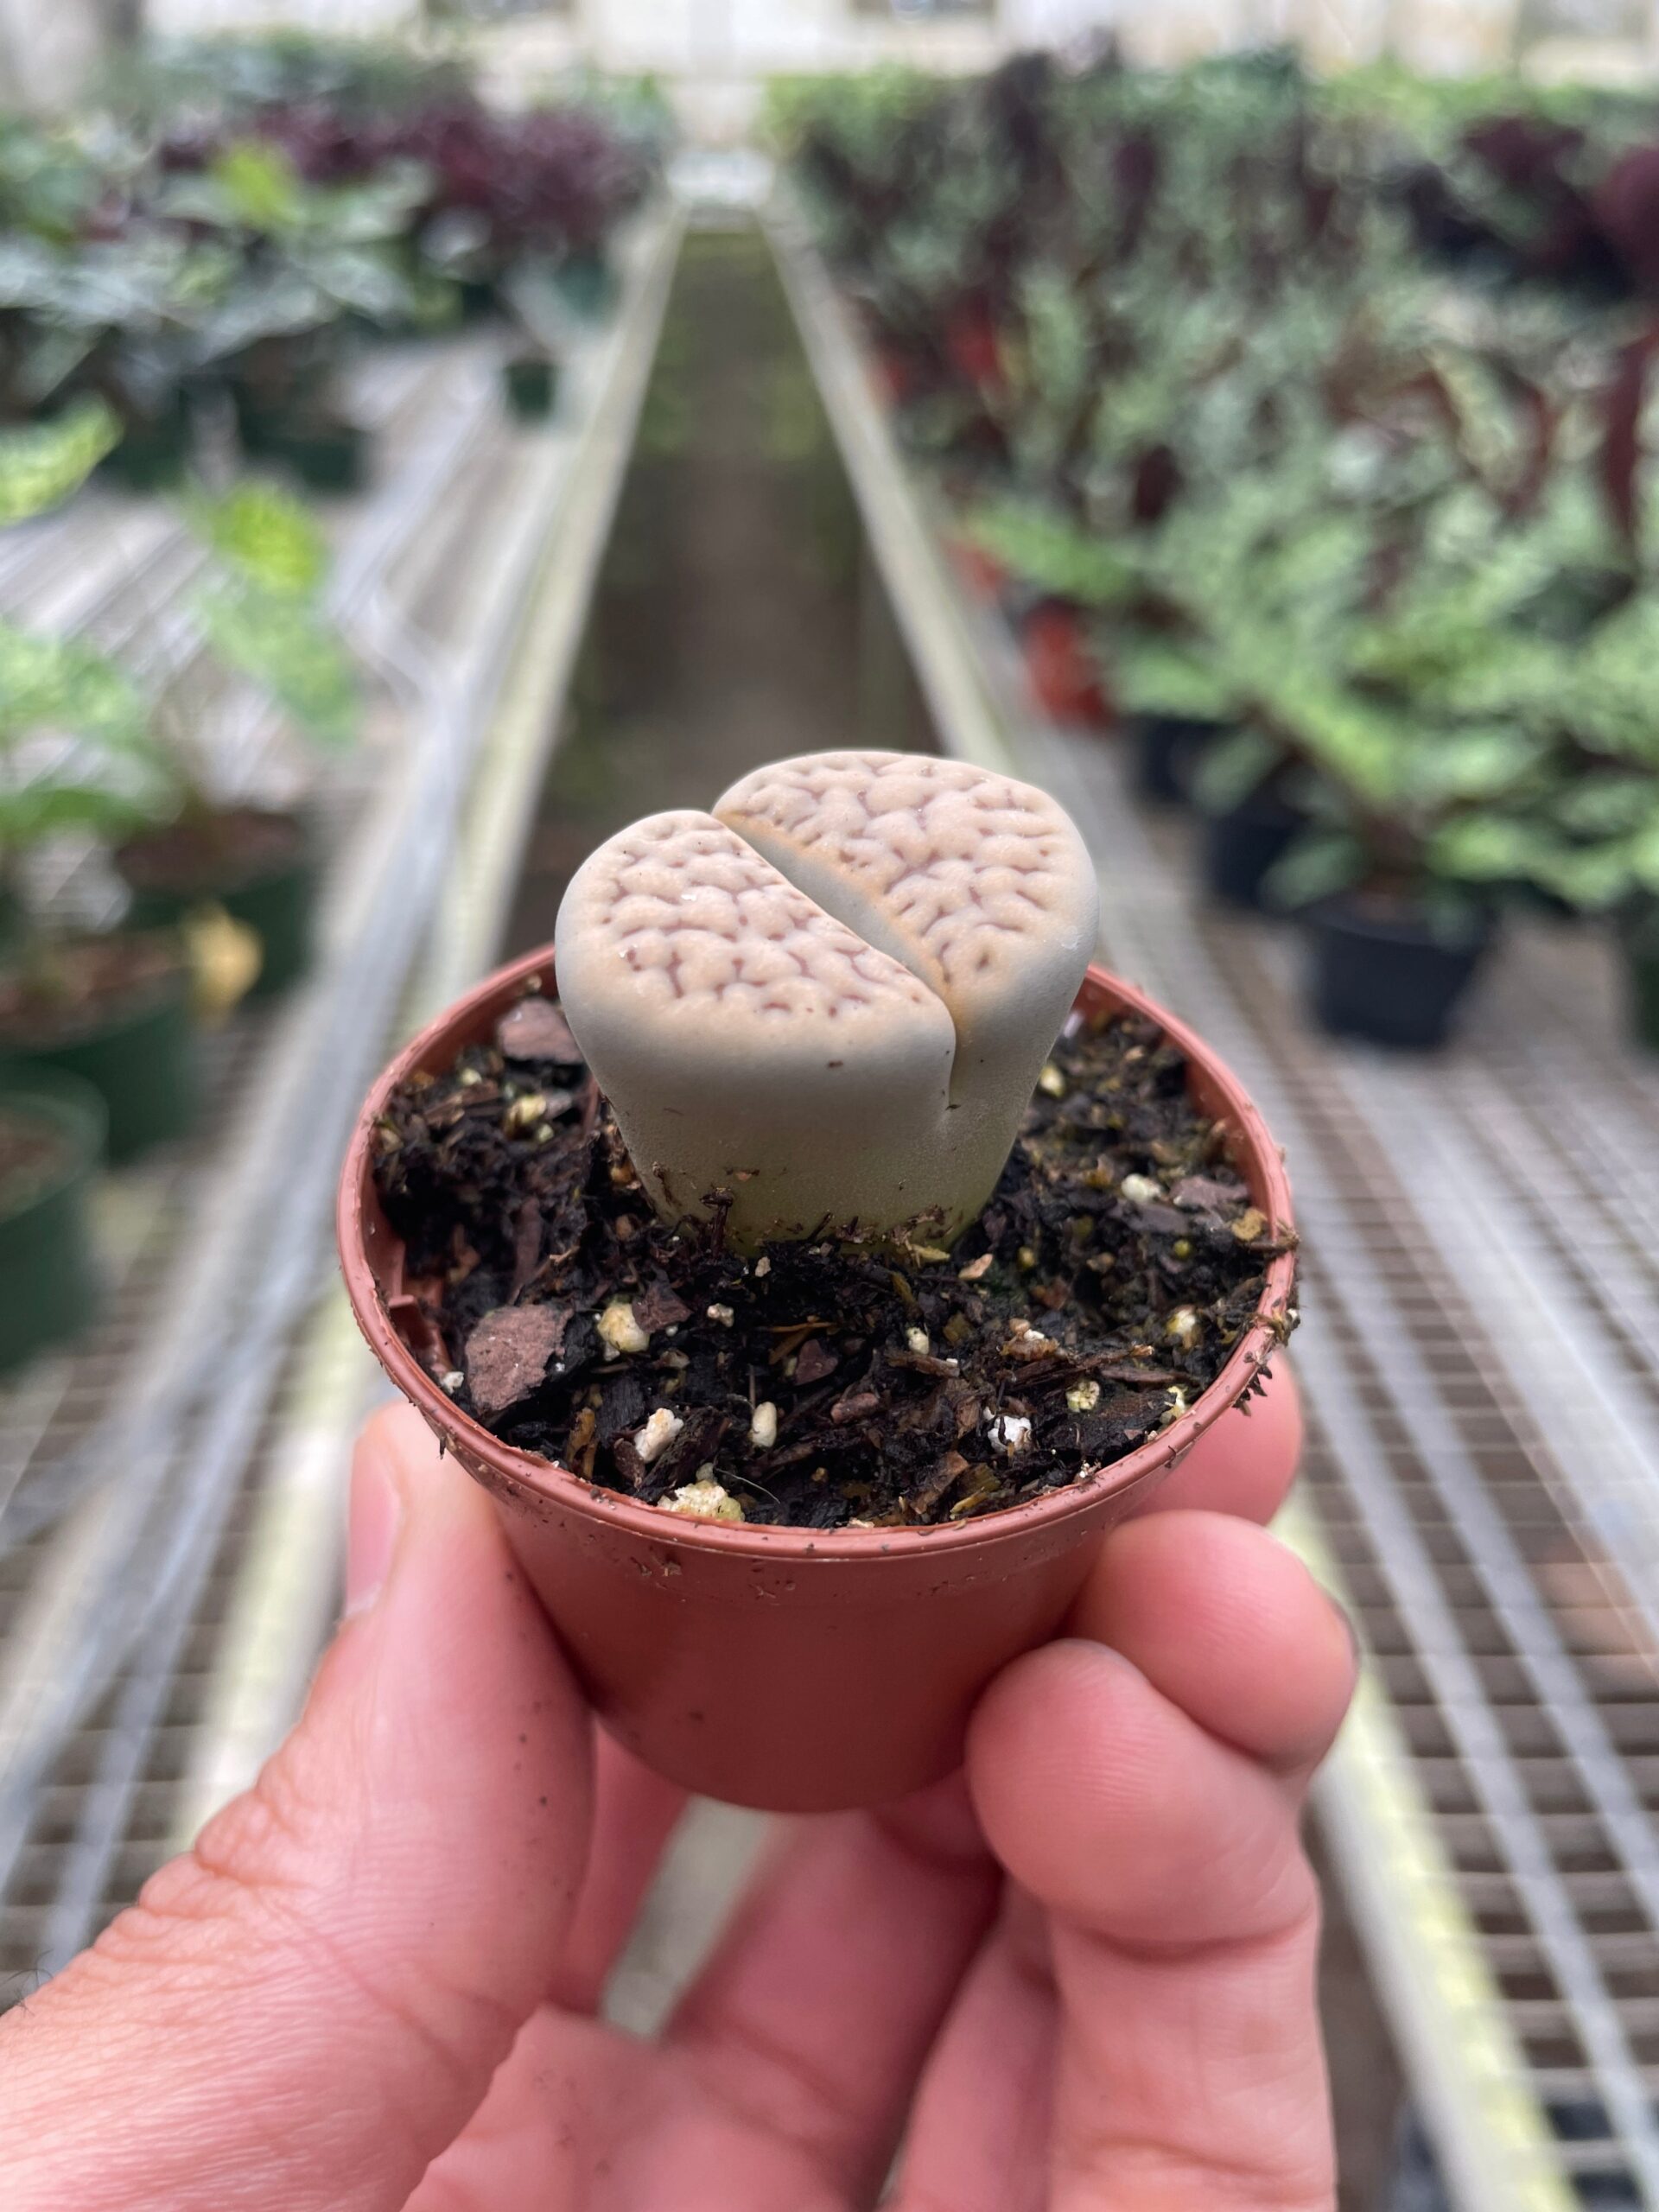 Hand holding a small, brown pot with a living stone succulent plant (Lithops) growing in it. The background shows rows of plants in a greenhouse.